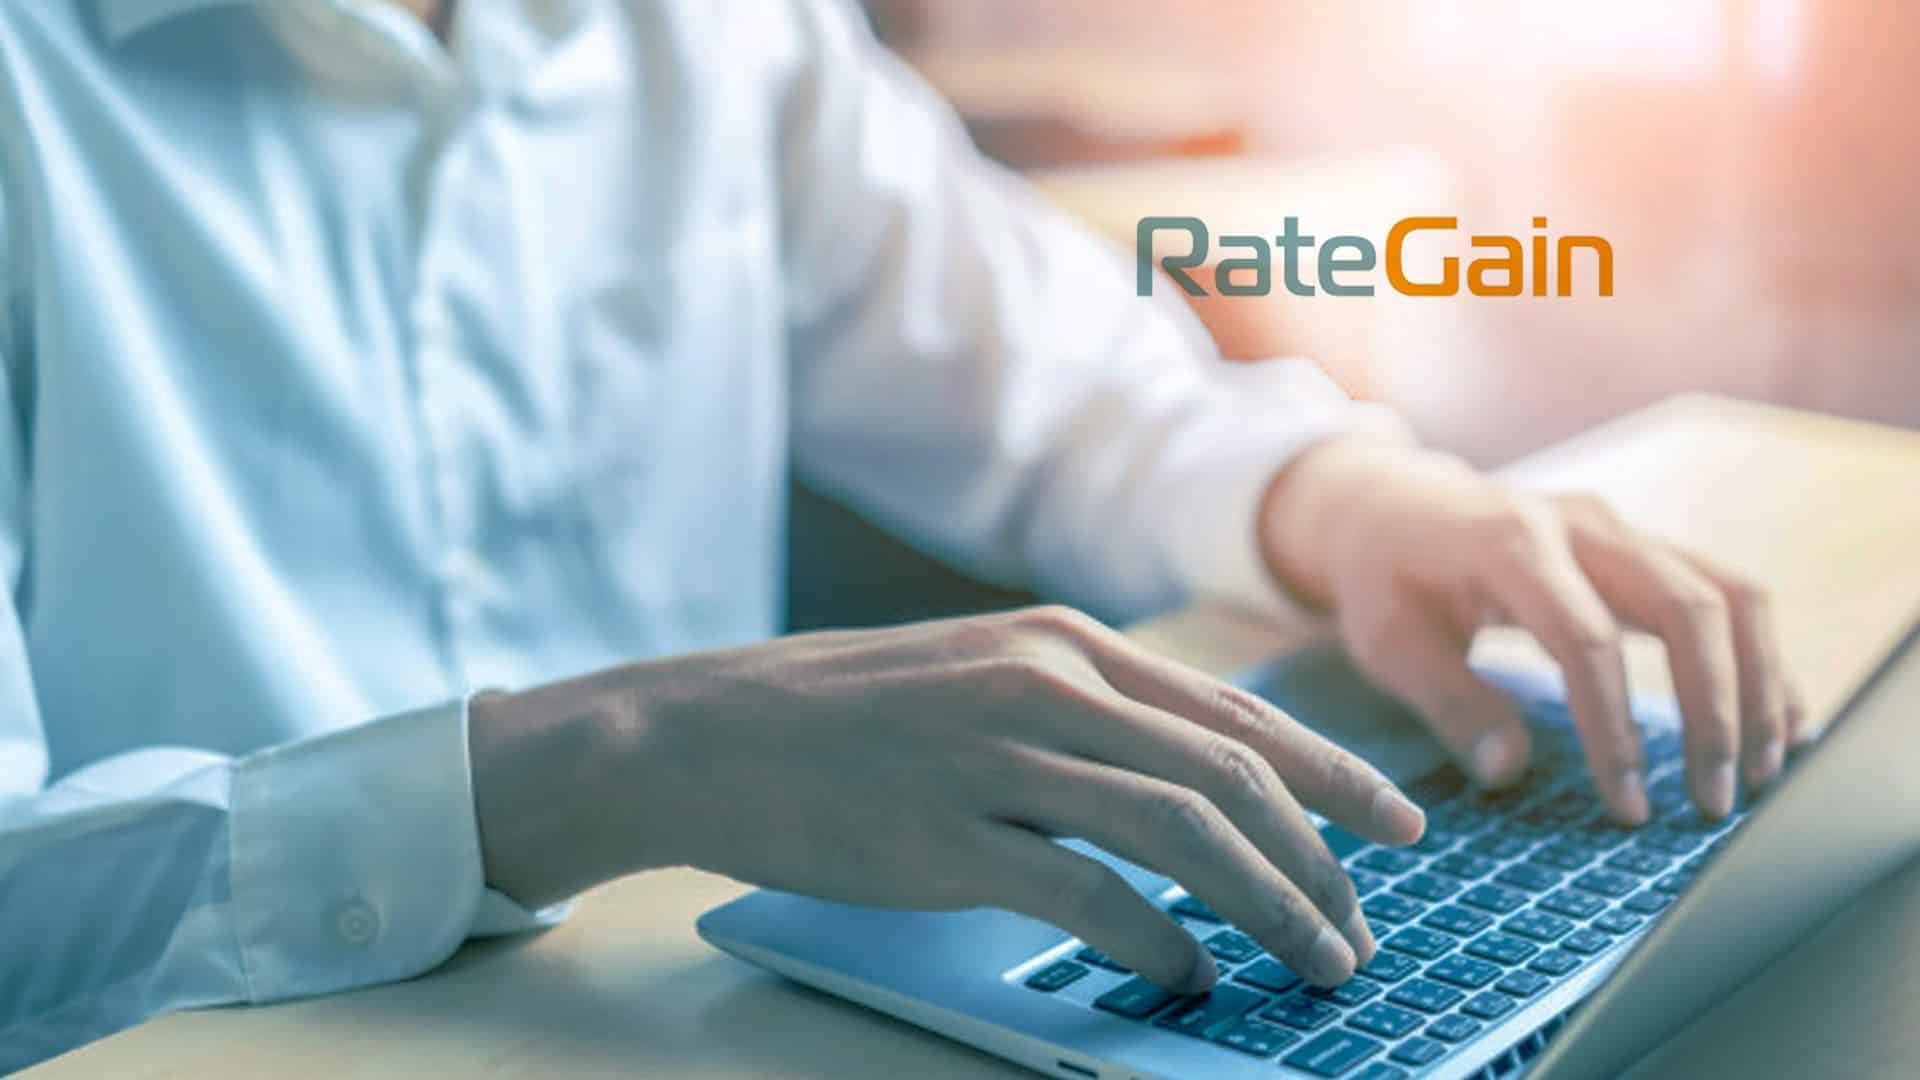 RateGain Travel Technologies raises Rs 599 cr from anchor investors ahead of IPO